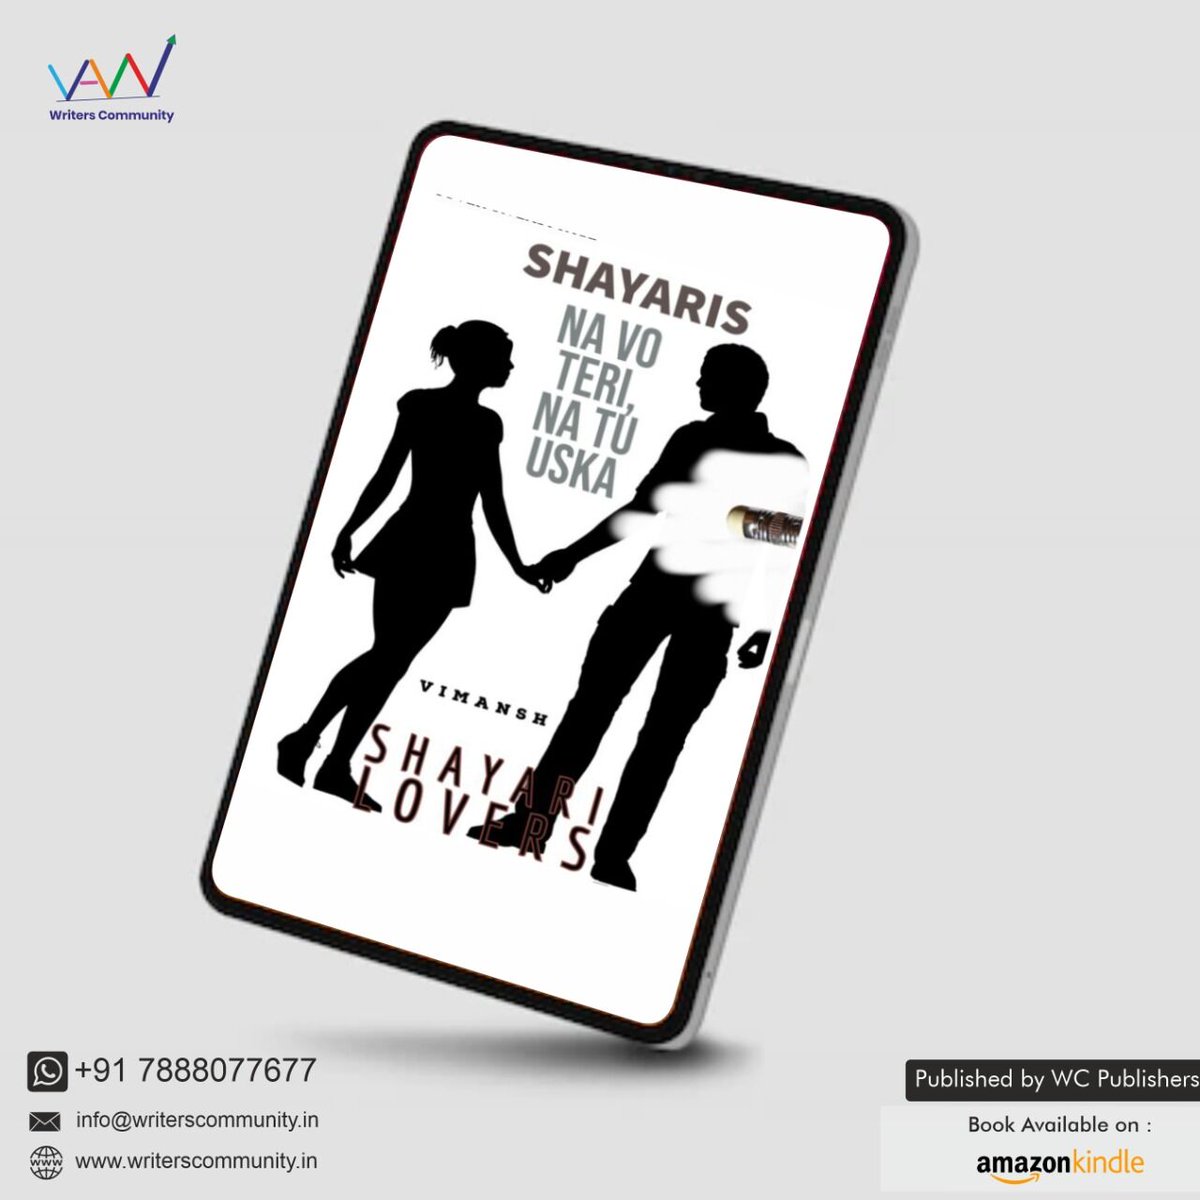 A young manager who is fond of writing Shayaris. Every shayar is not heartbroken, some only have a passion. This book is all about Shayaris related to Maybe your story, maybe mine. Download it from amzn.to/3tBljvP